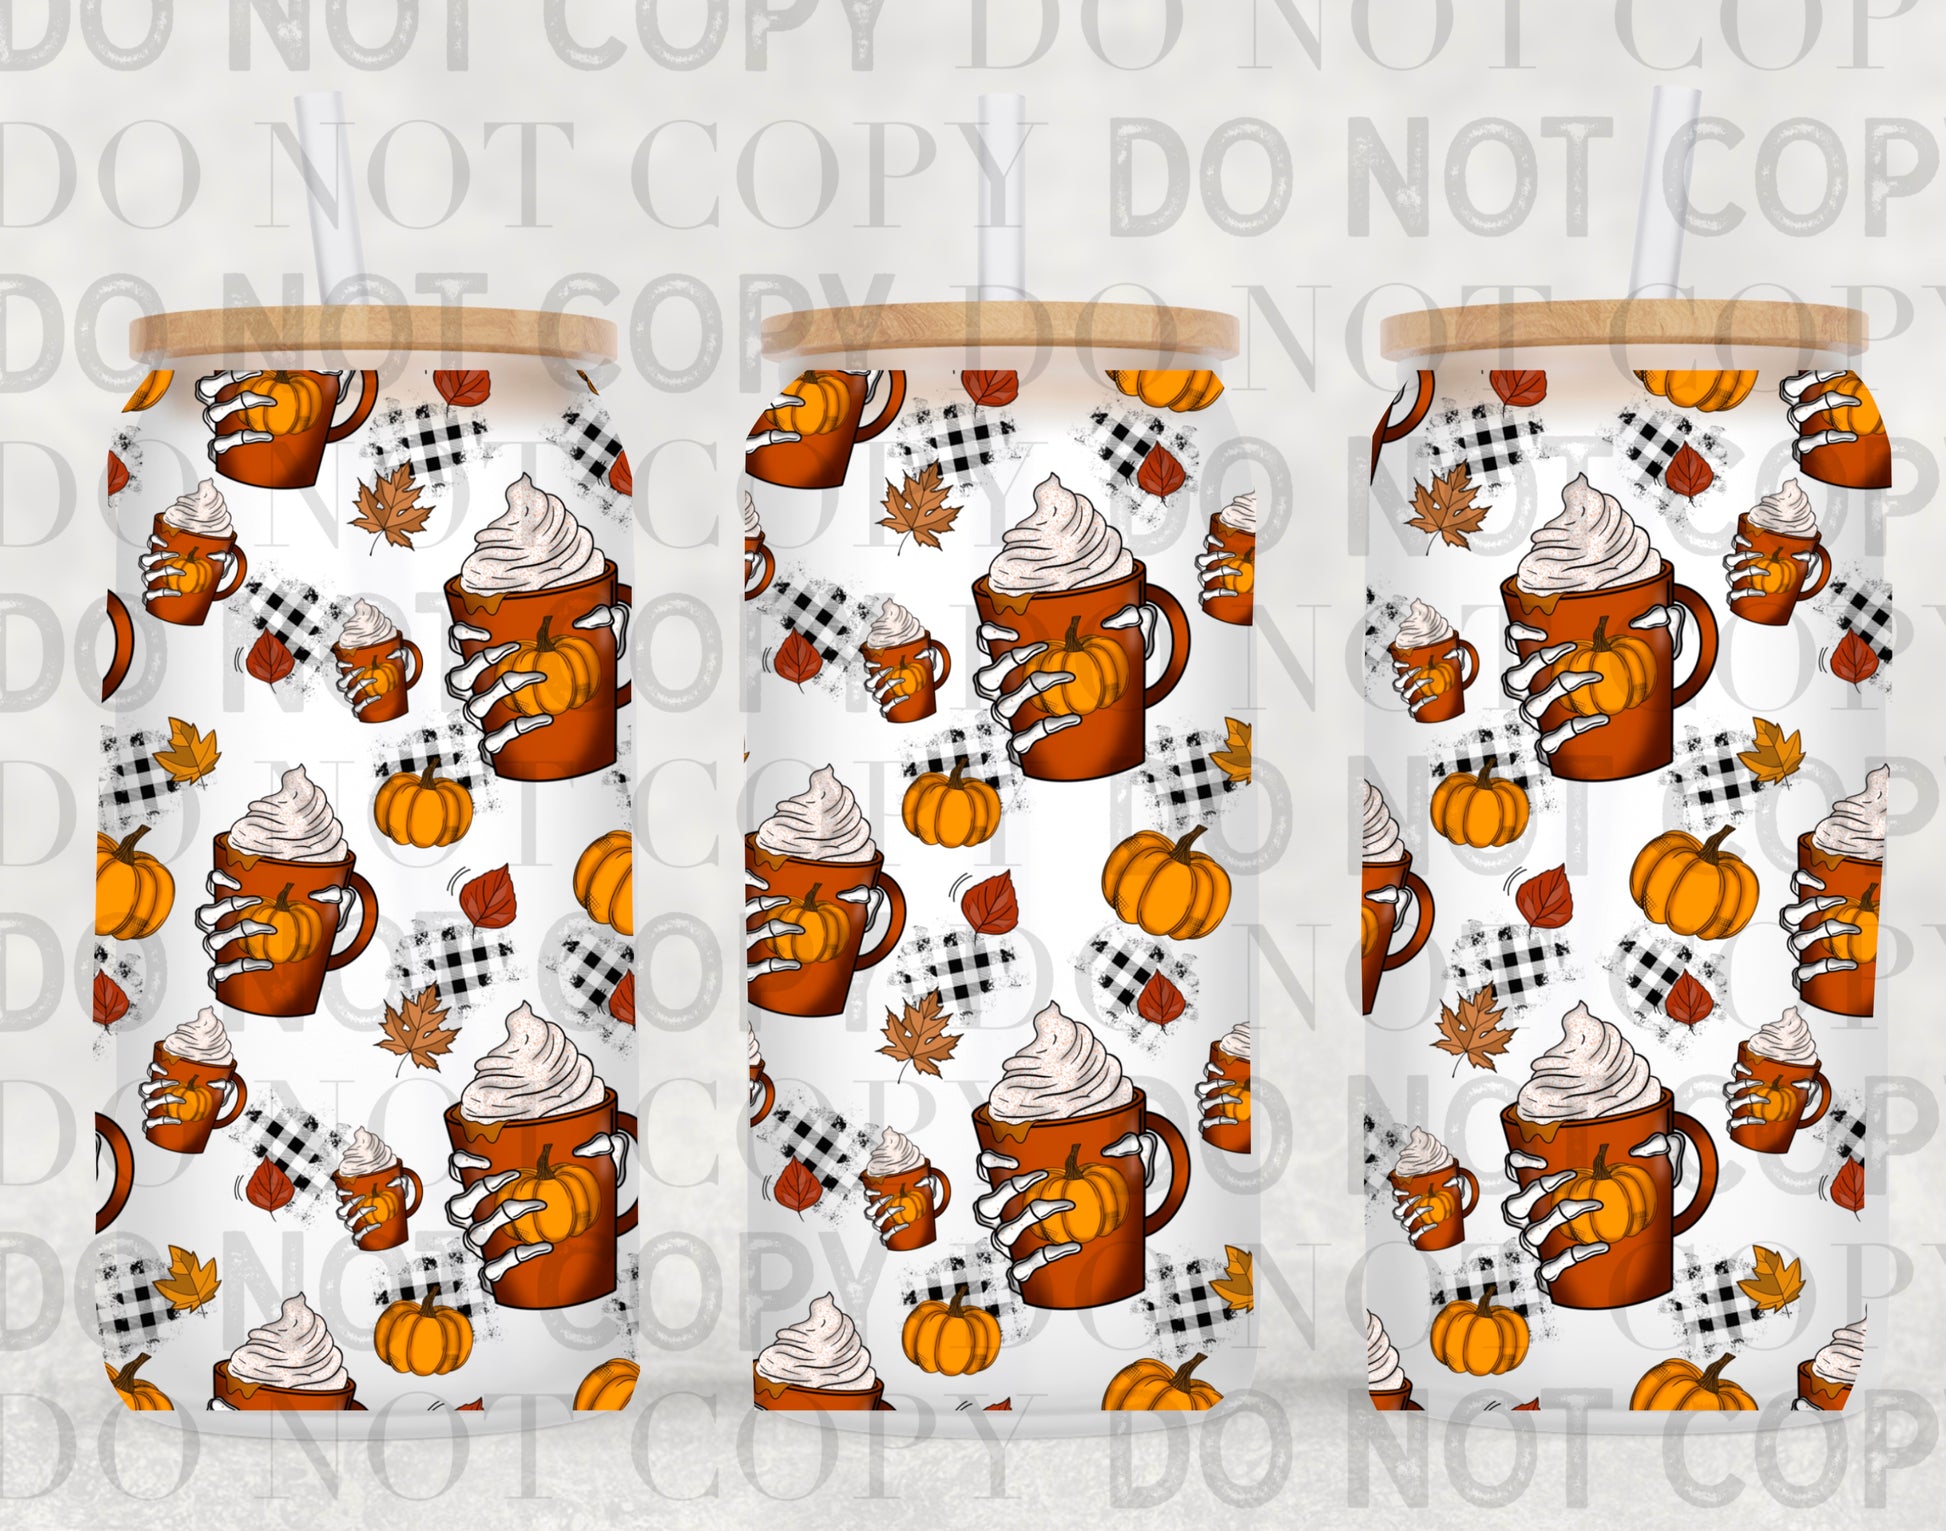 Pumpkin spice tumbler wrap sized for 16 oz frosted cup from mother tumbler  Cerra's Shop Creates   